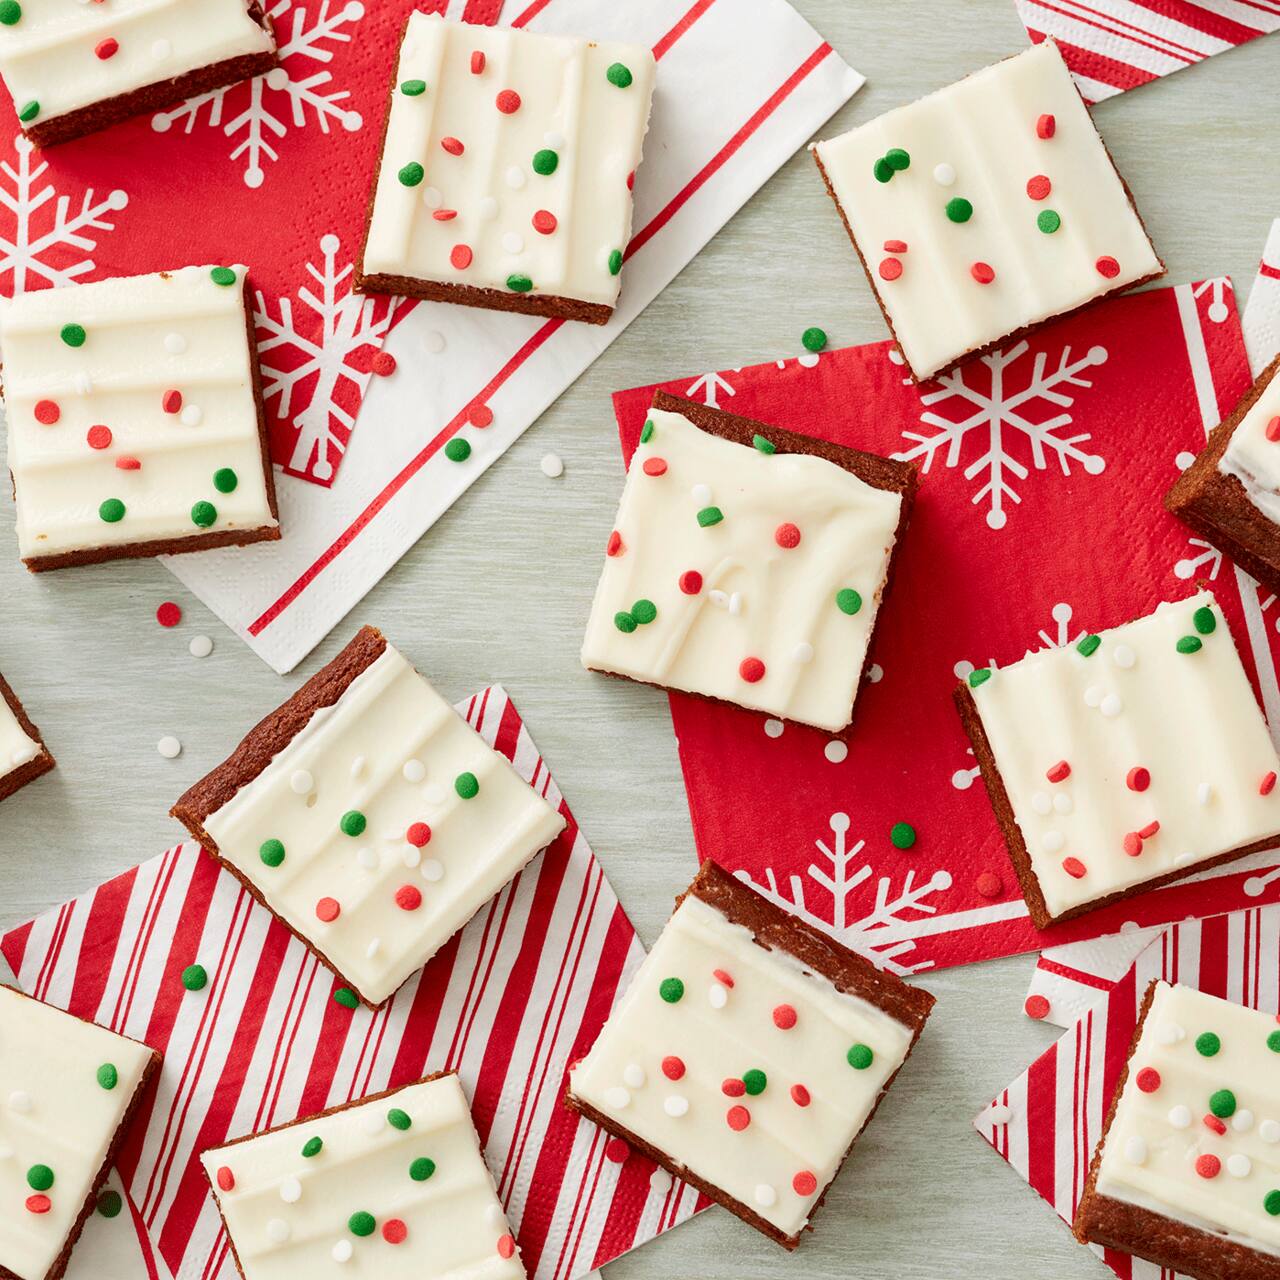 Gingerbread Bars with Cream Cheese Icing